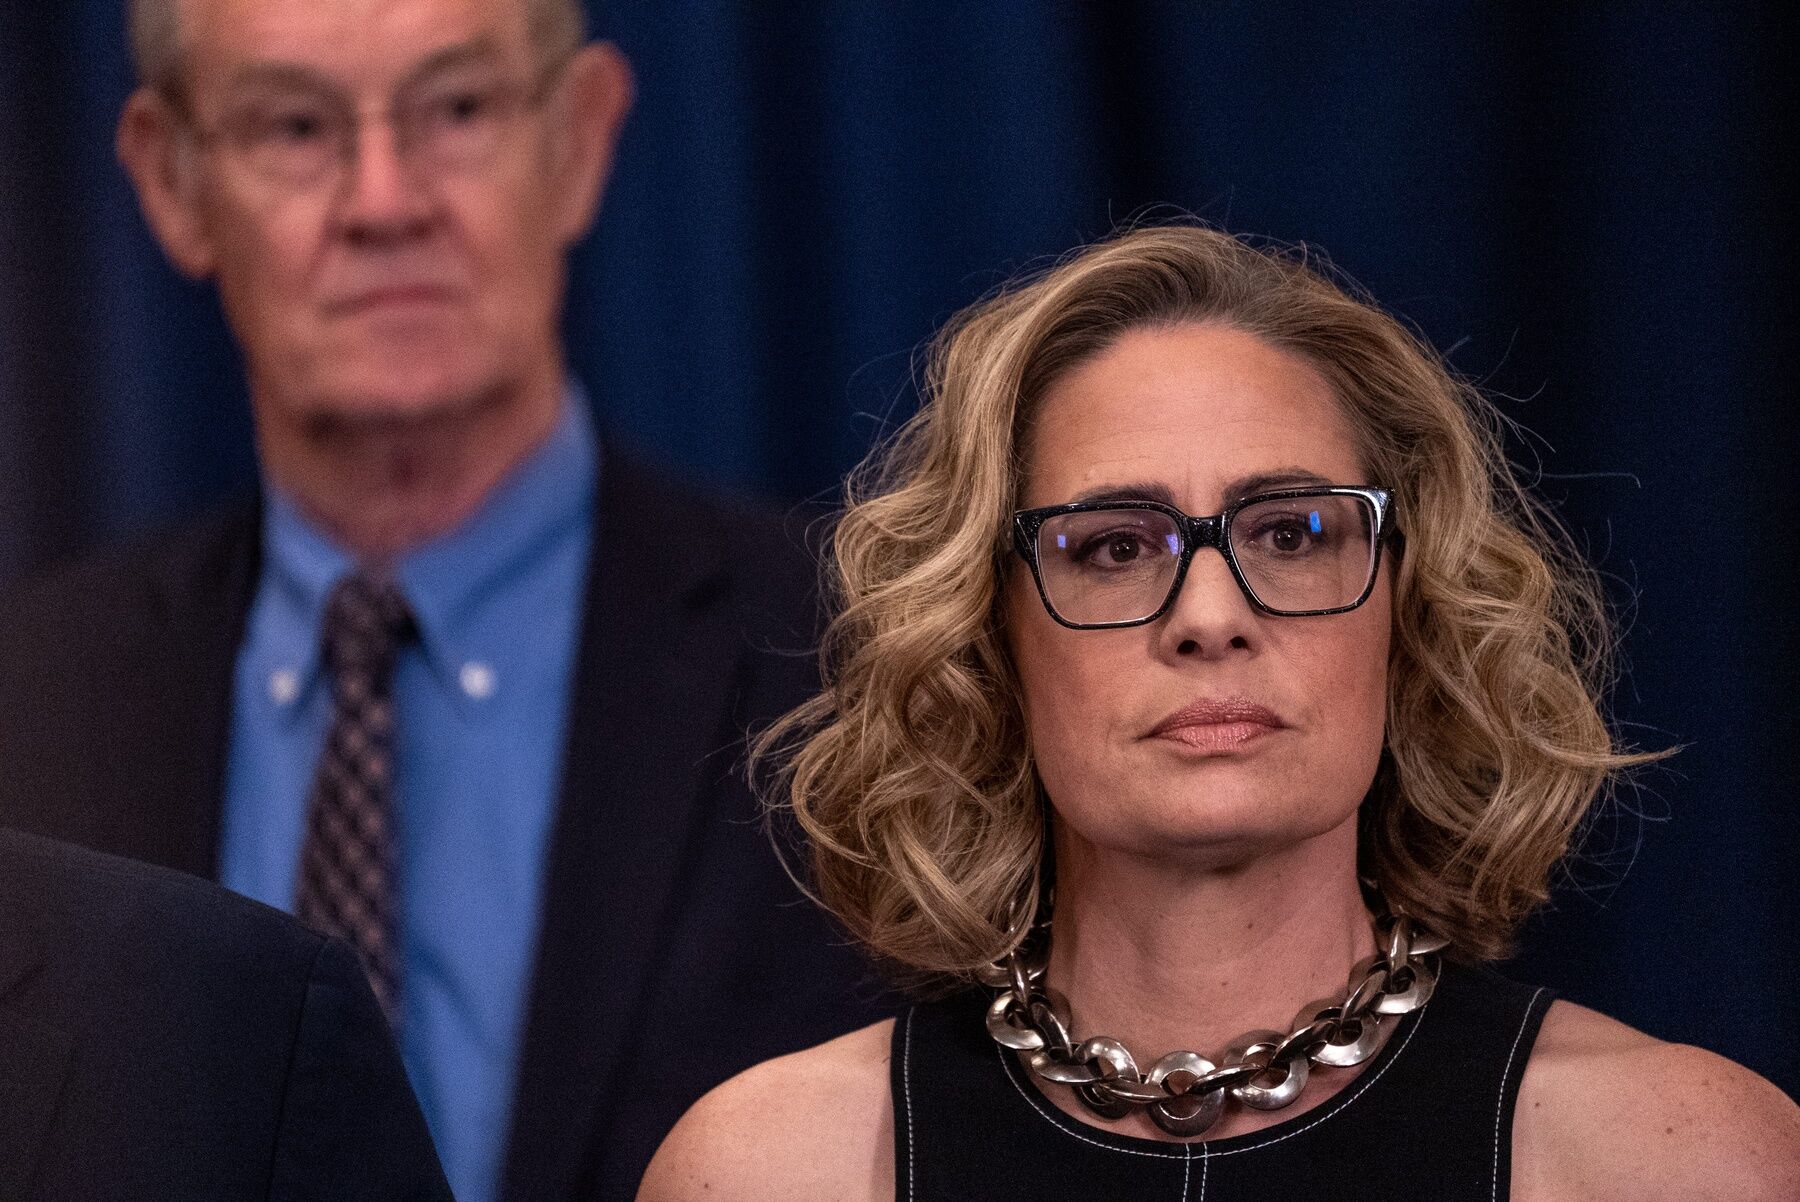 Arizona Sen. Kyrsten Sinema attends a press conference discussing Colorado River conservation investments at the state Capitol in Phoenix on April 6, 2023.